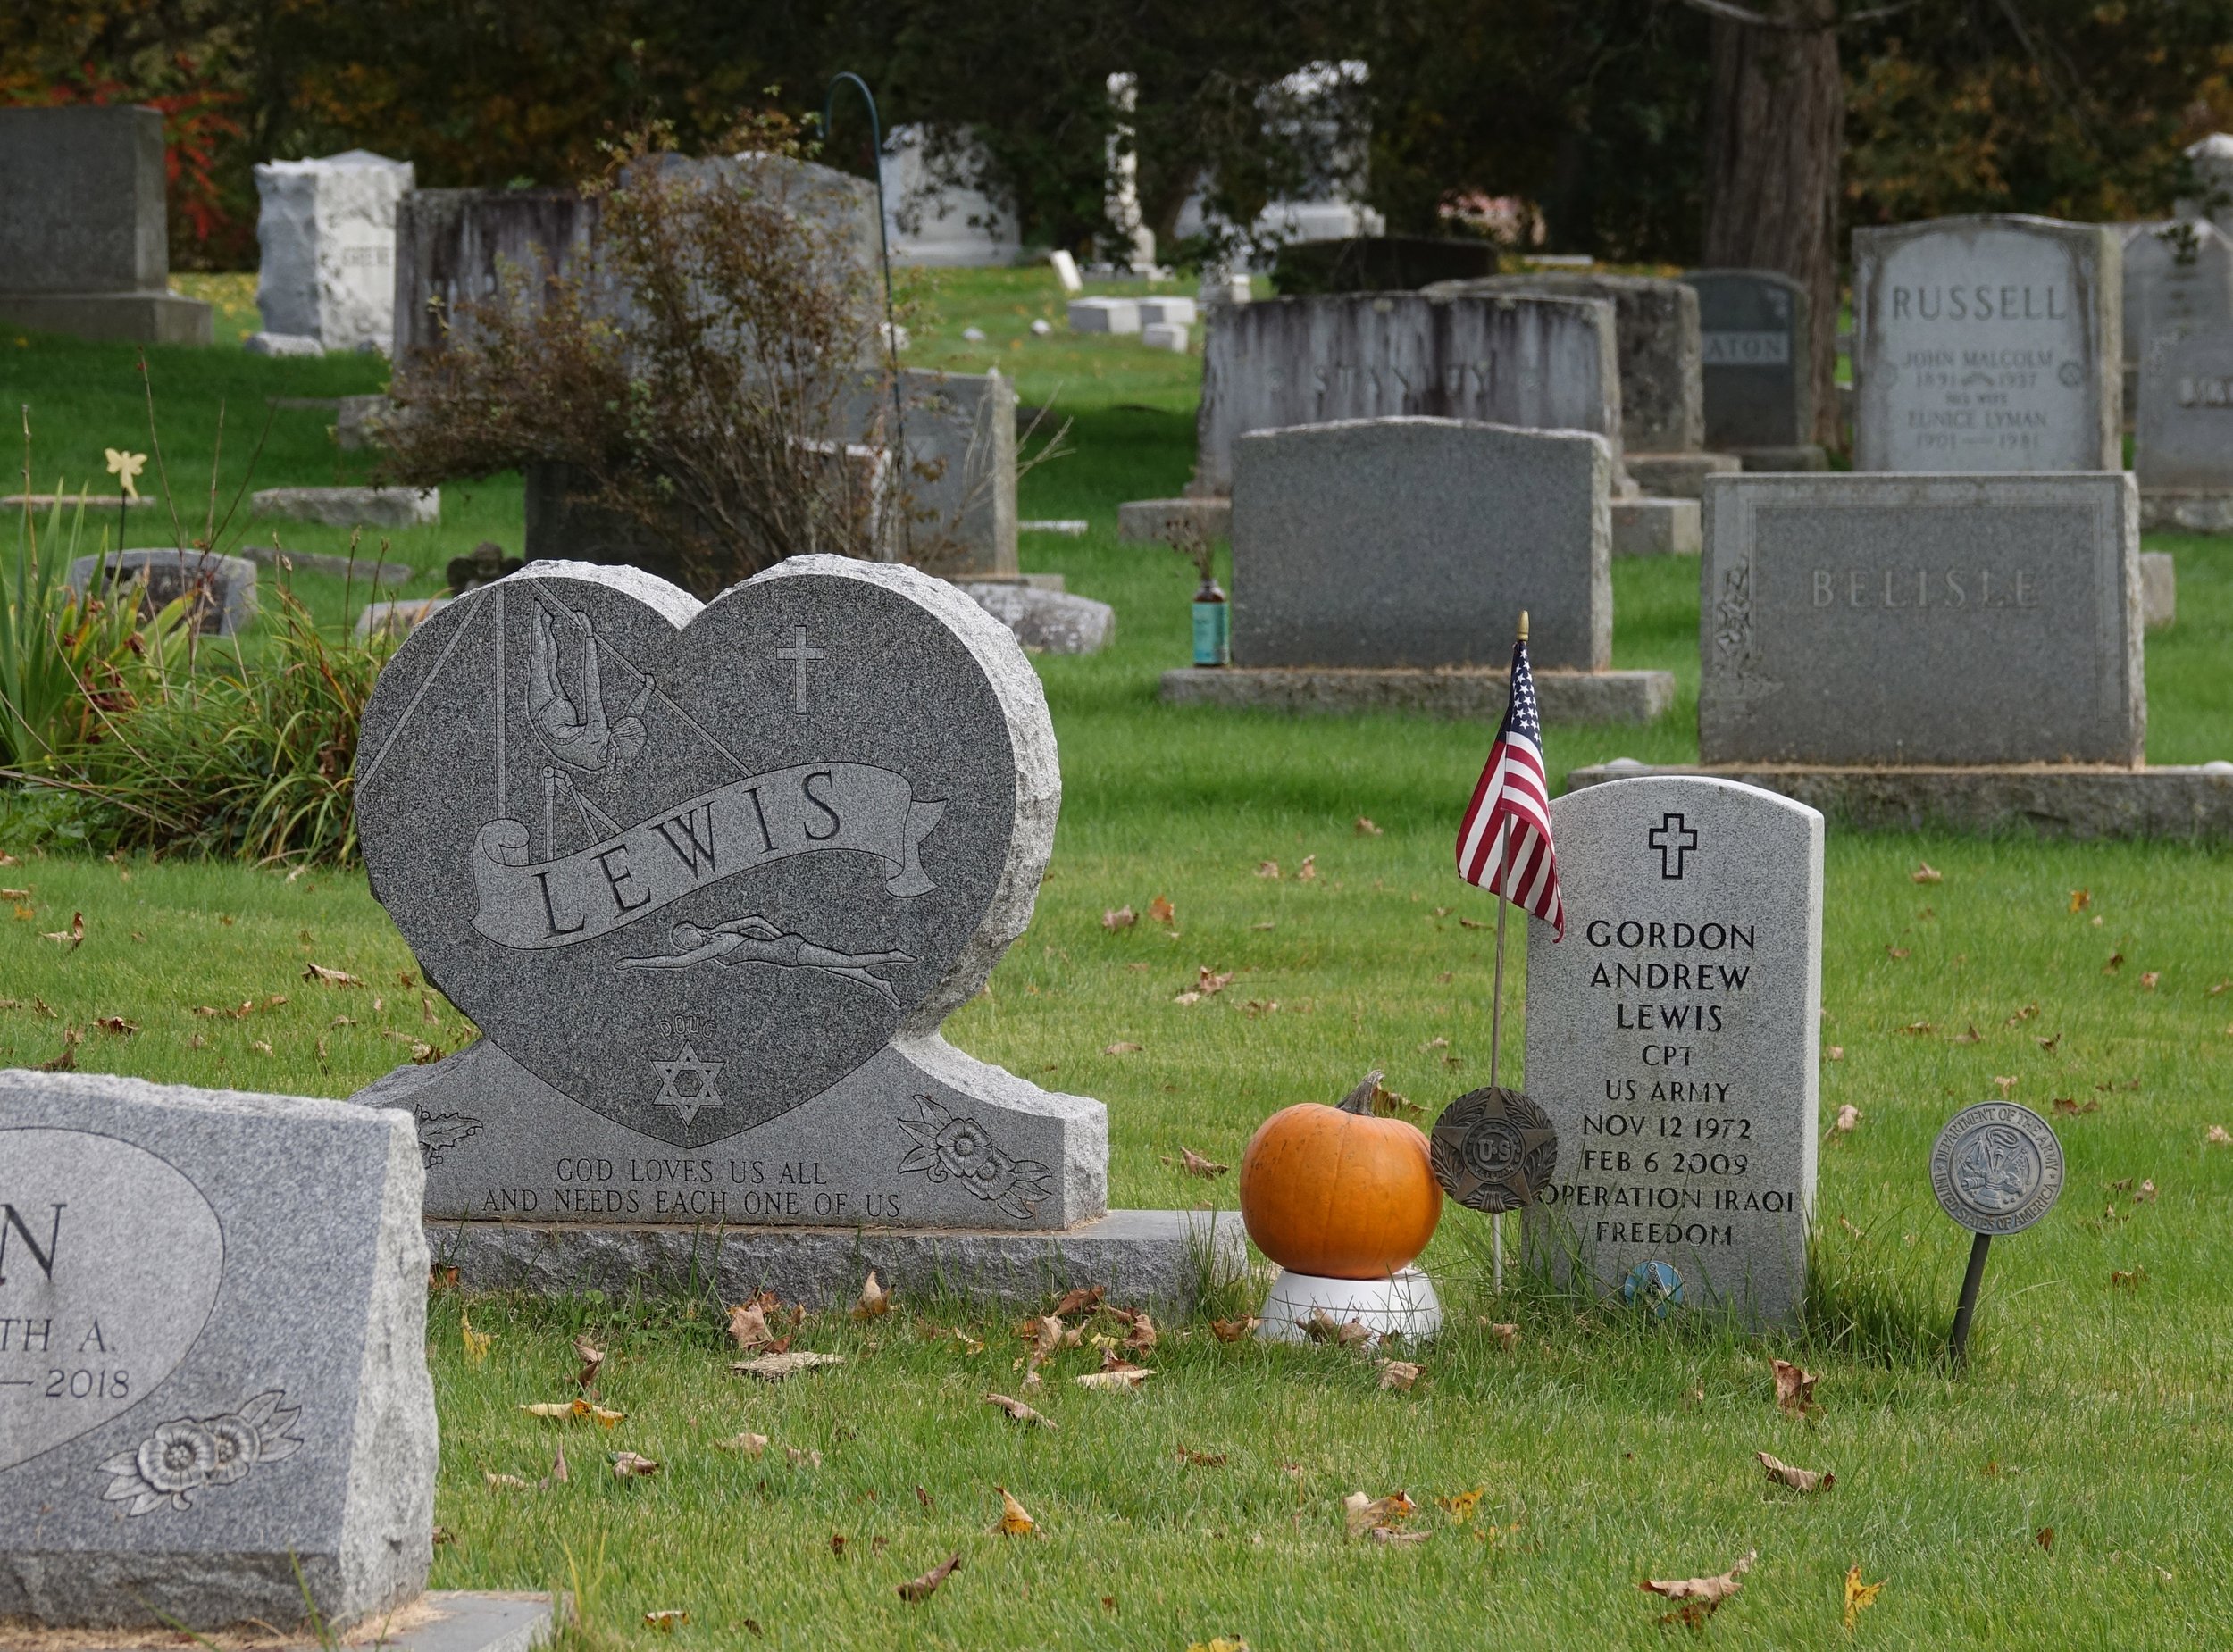   Someone remembers to mark the season at a special gravesite in Hope Cemetery. Photo by Gordon Miller  